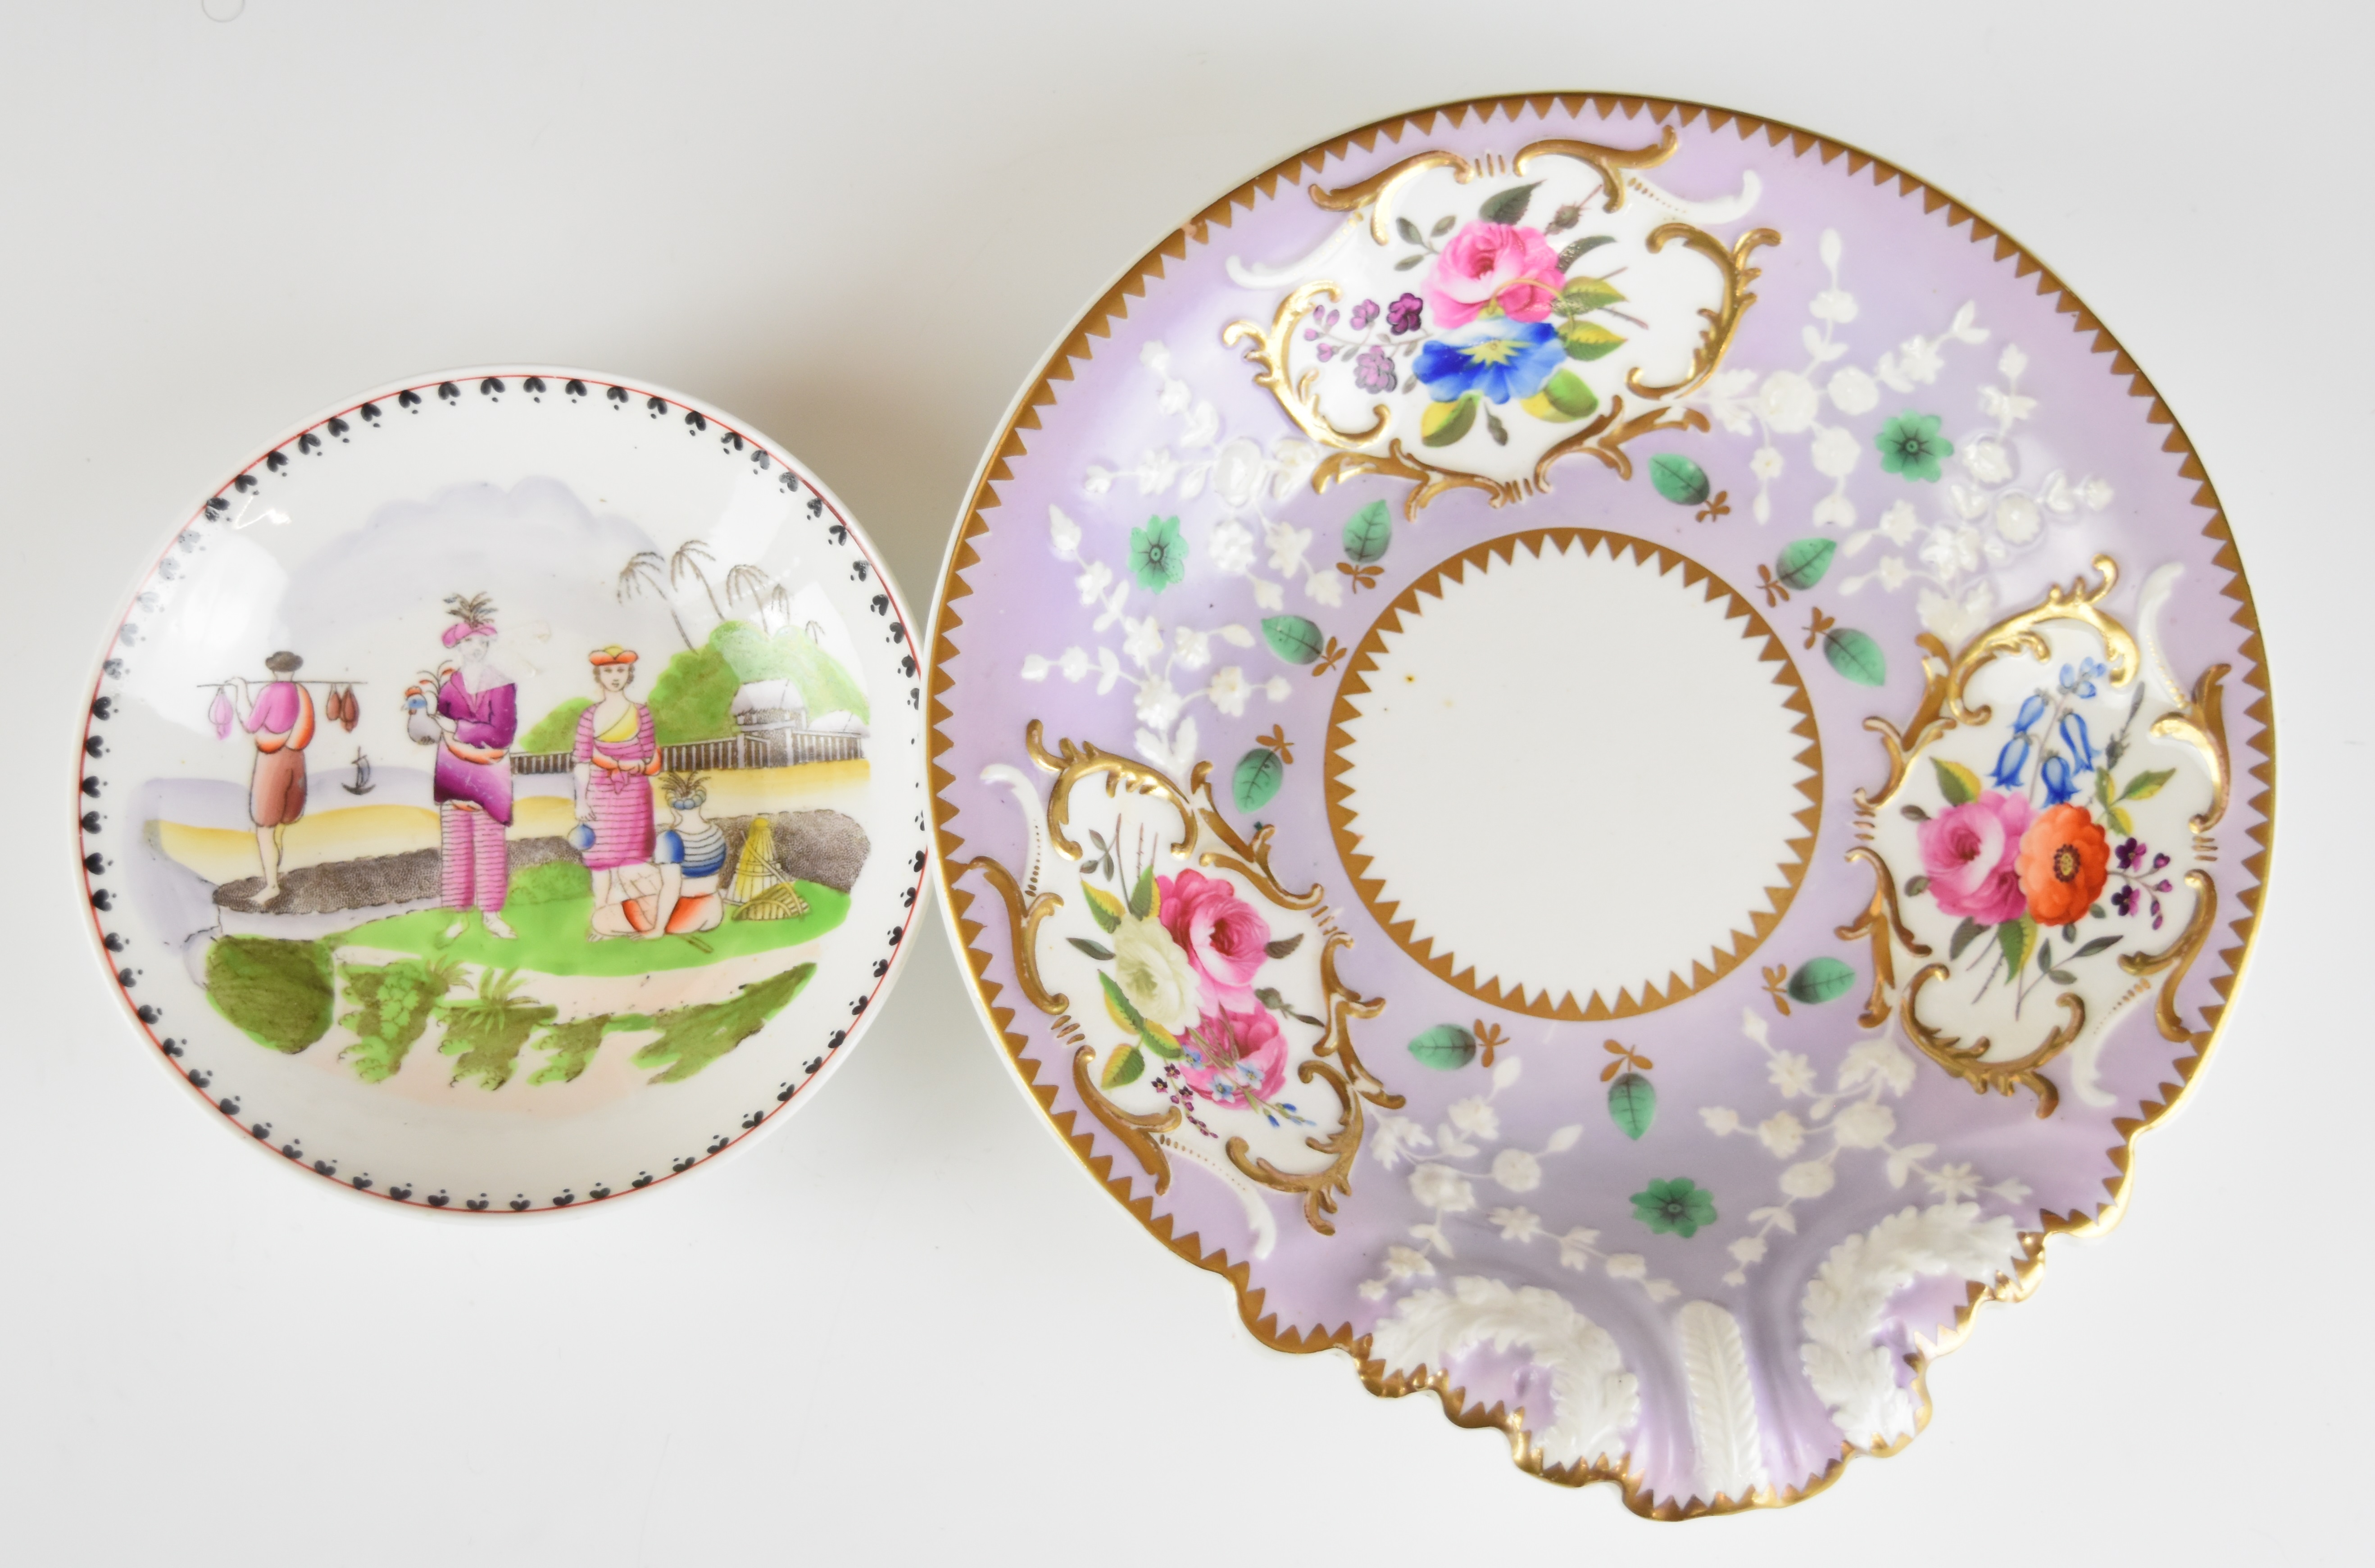 19thC porcelain saucers, dishes, coffee cans and cups including New Hall, Ridgway, bat print - Image 18 of 22